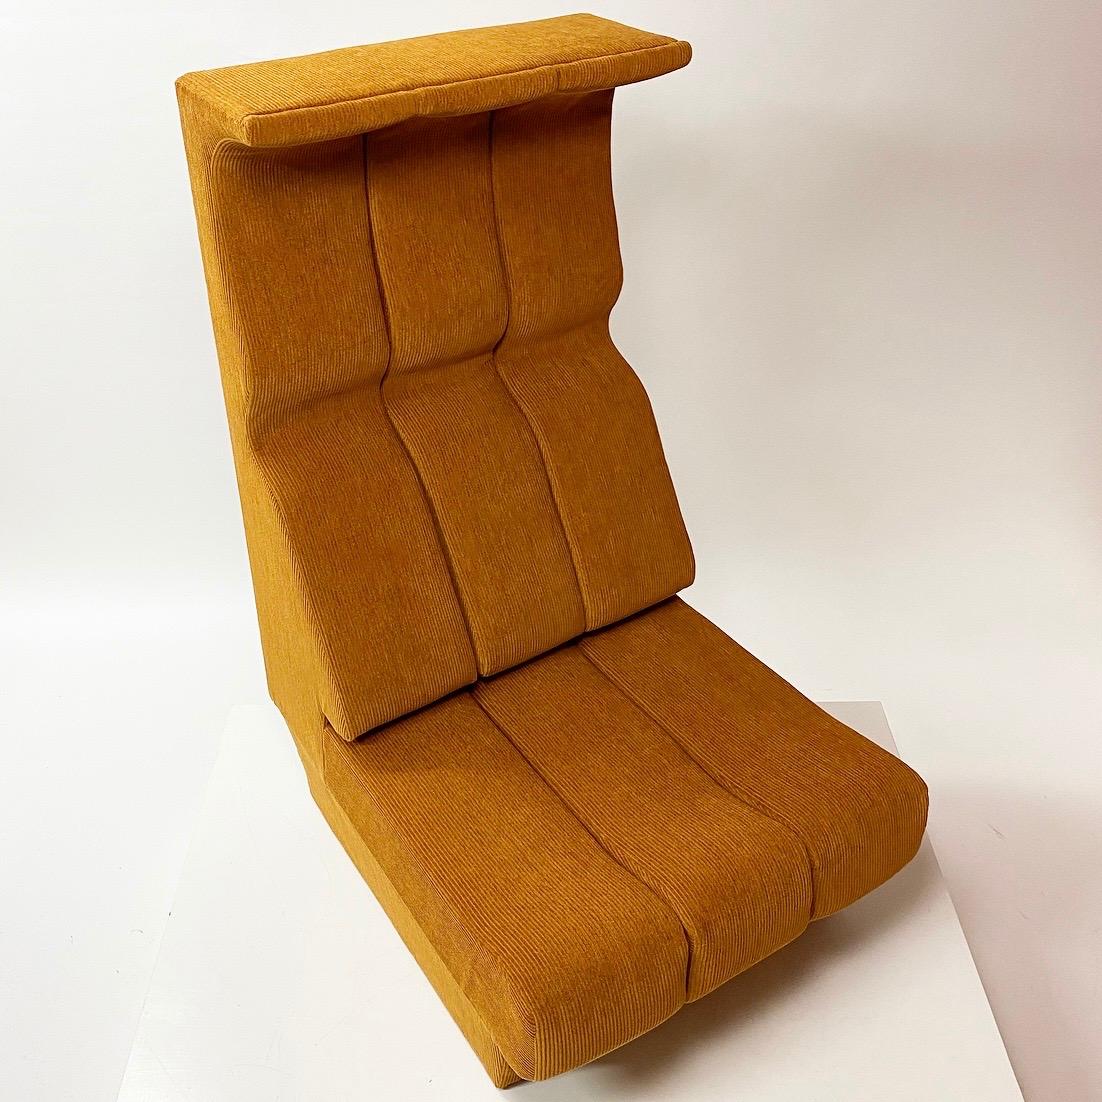 Interlübke Highback Space Age Seat with New Upholstery, Germany, 1970 For Sale 7